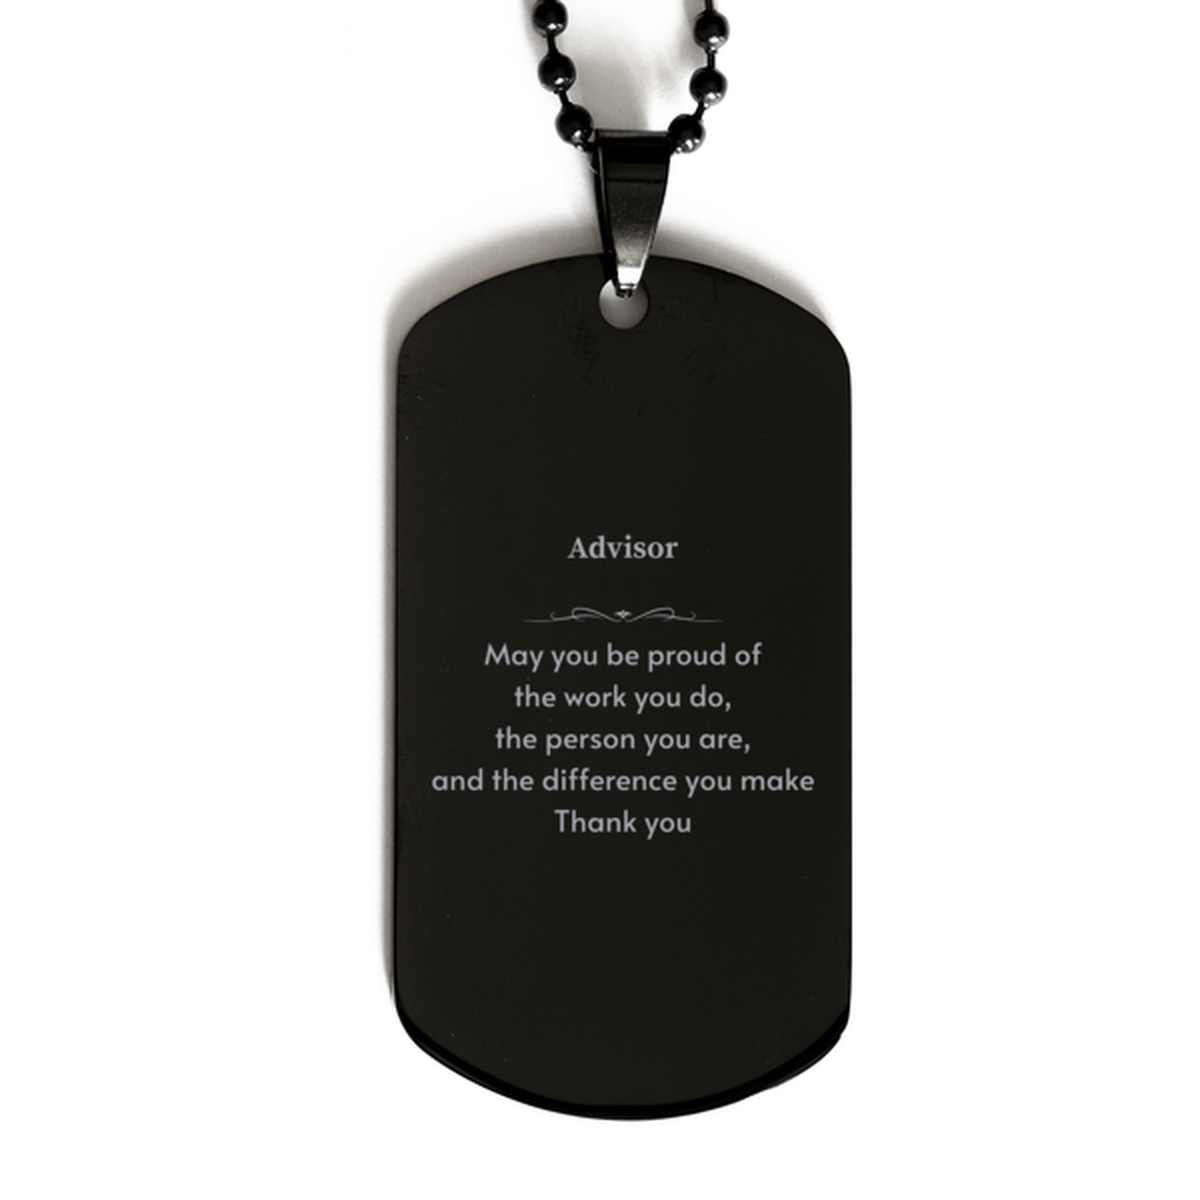 Heartwarming Black Dog Tag Retirement Coworkers Gifts for Advisor, Advisor May You be proud of the work you do, the person you are Gifts for Boss Men Women Friends